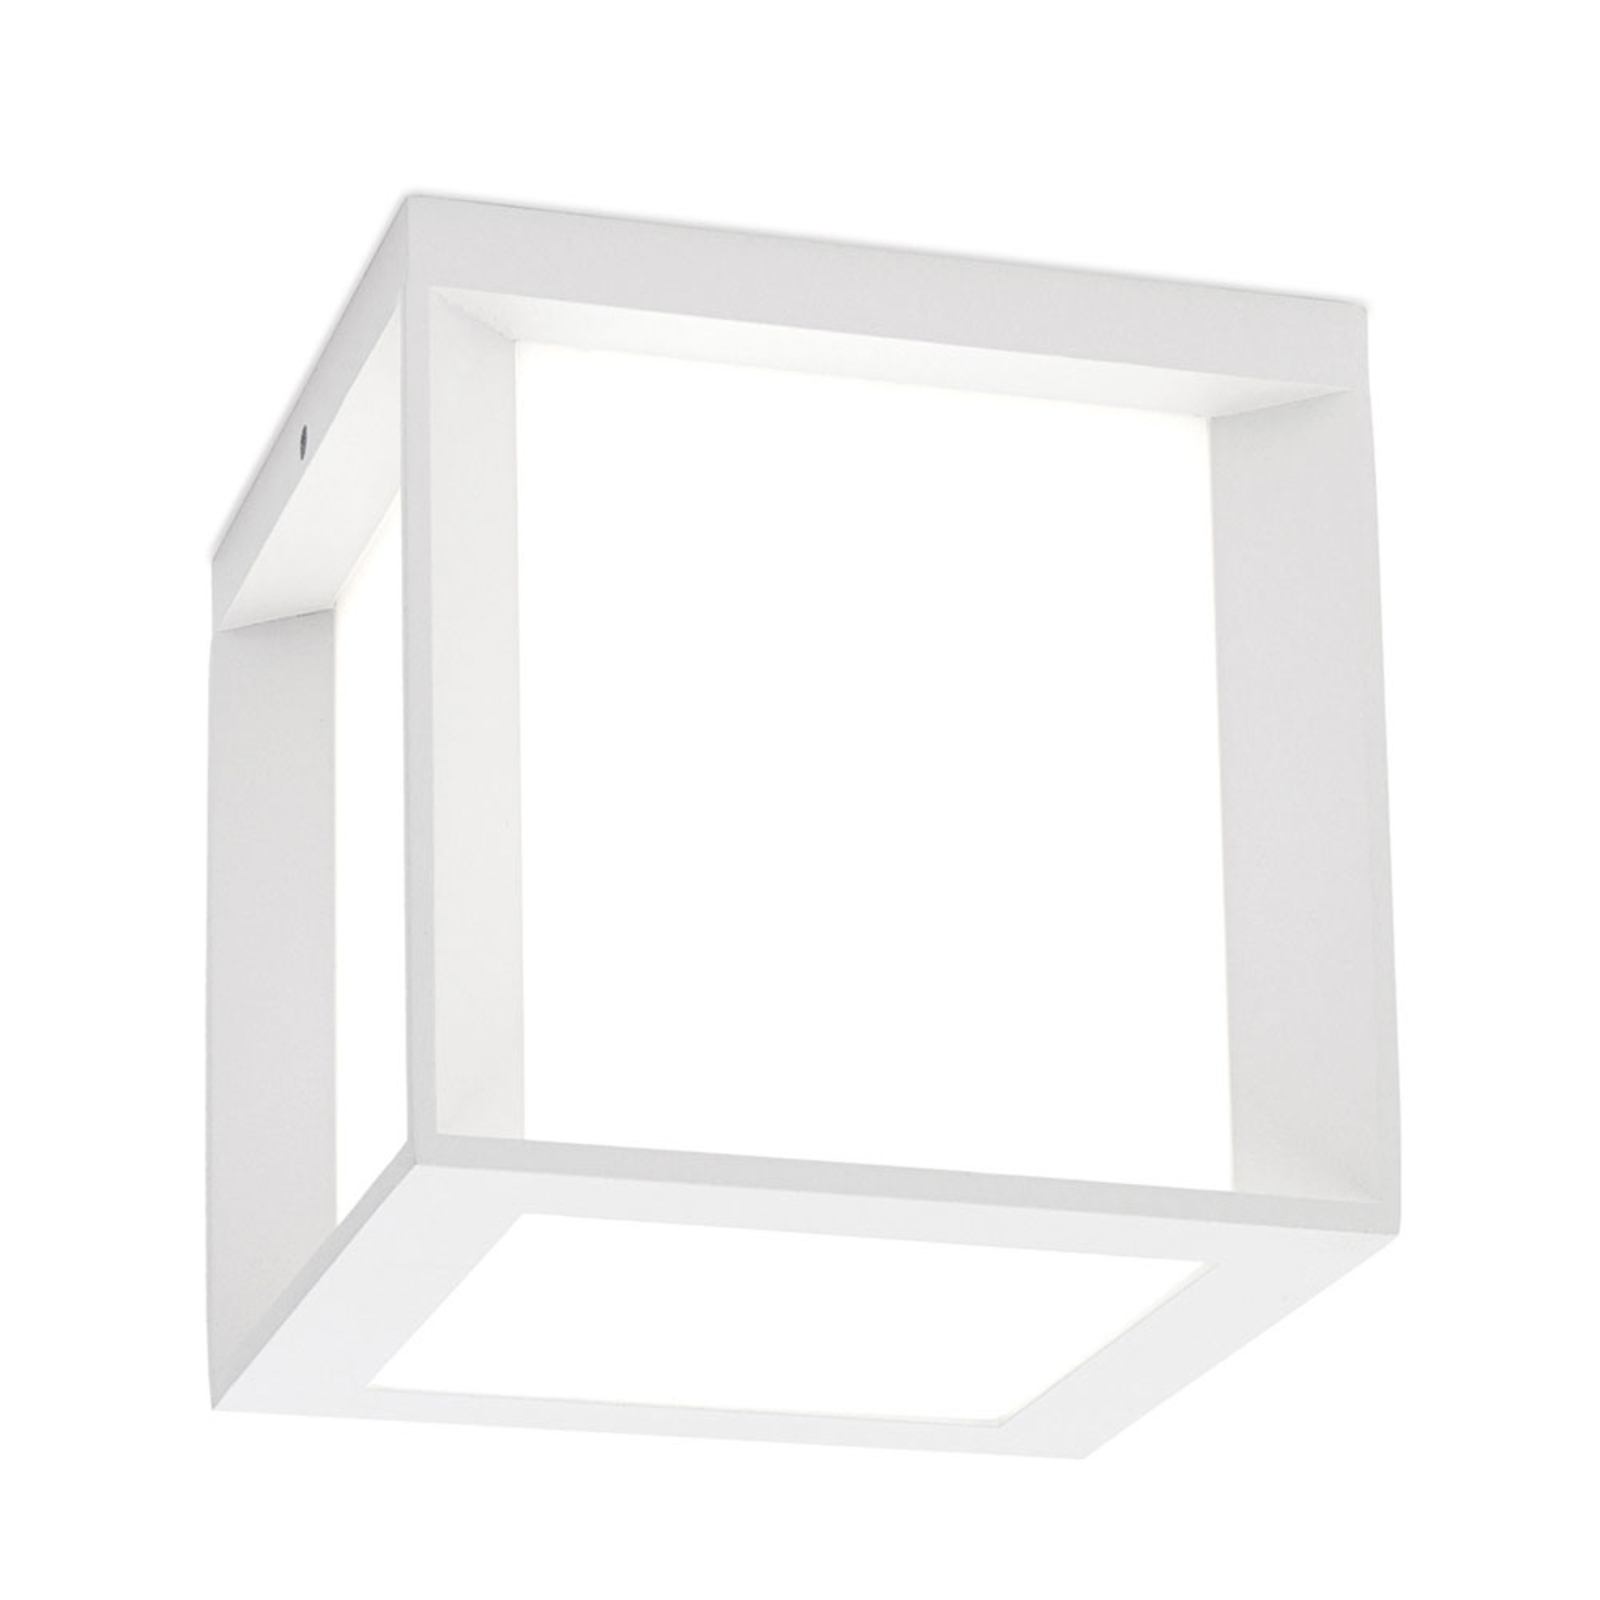 Henry outdoor wall light, 16 x 16 x 16 cm, white